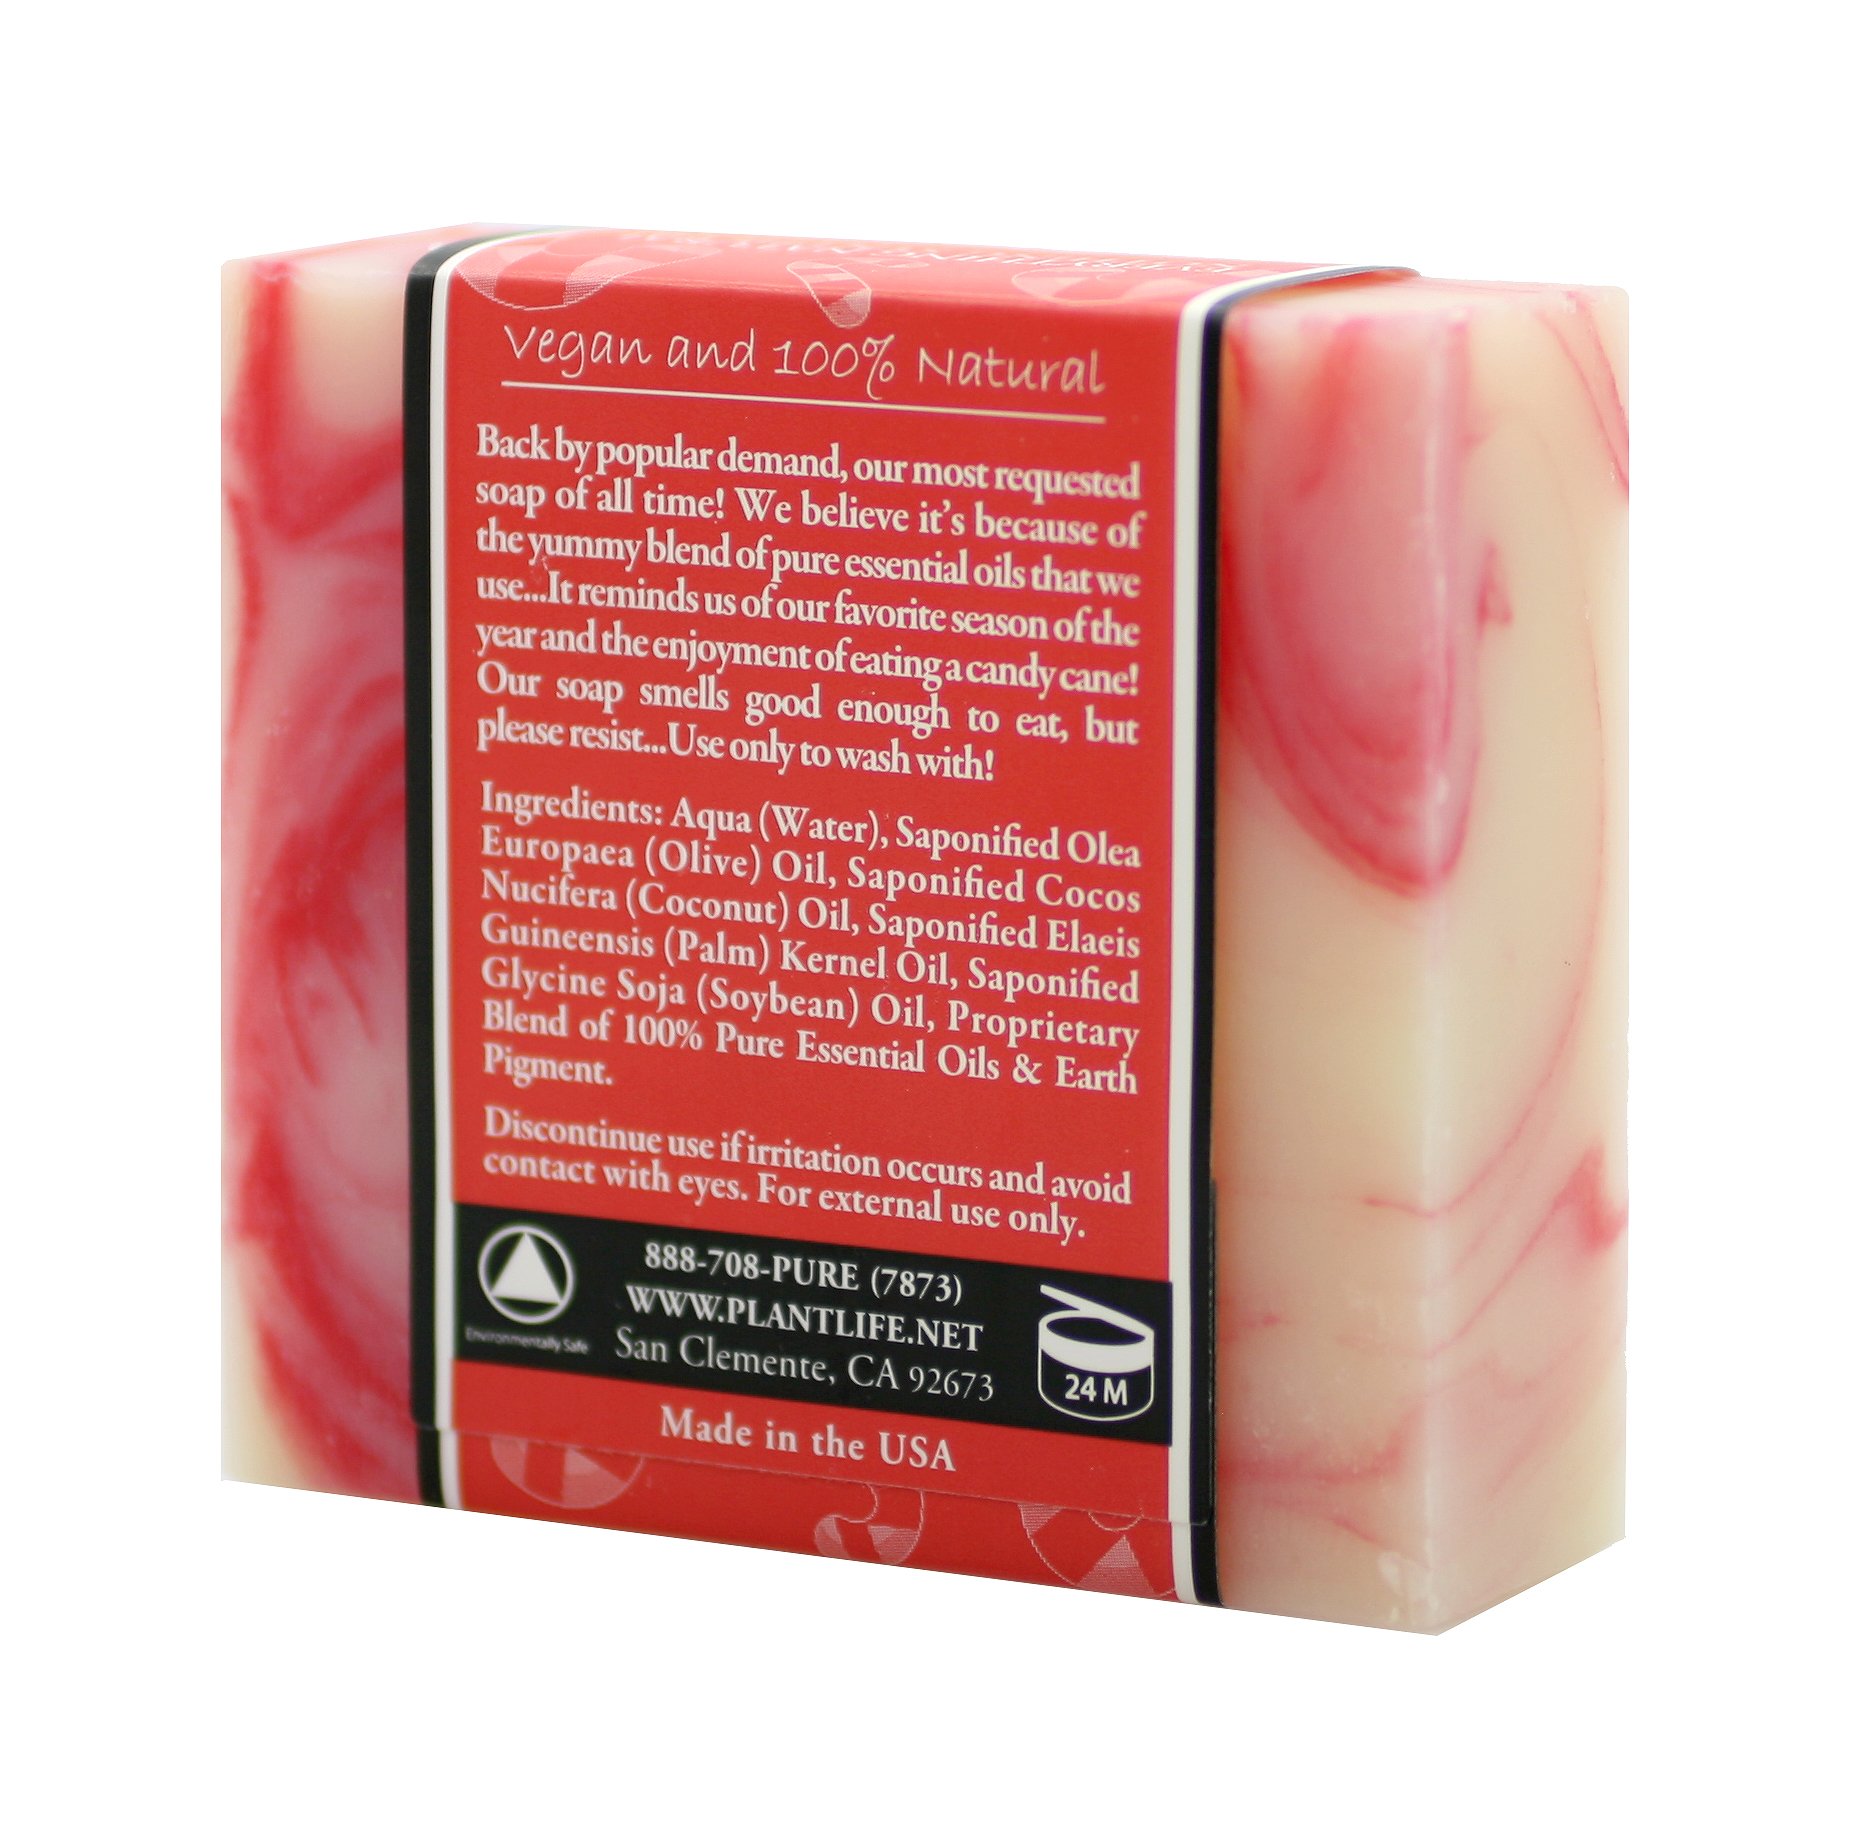 Plantlife Candy Cane Bar Soap - Moisturizing and Soothing Soap for Your Skin - Hand Crafted Using Plant-Based Ingredients - Made in California 4oz Bar